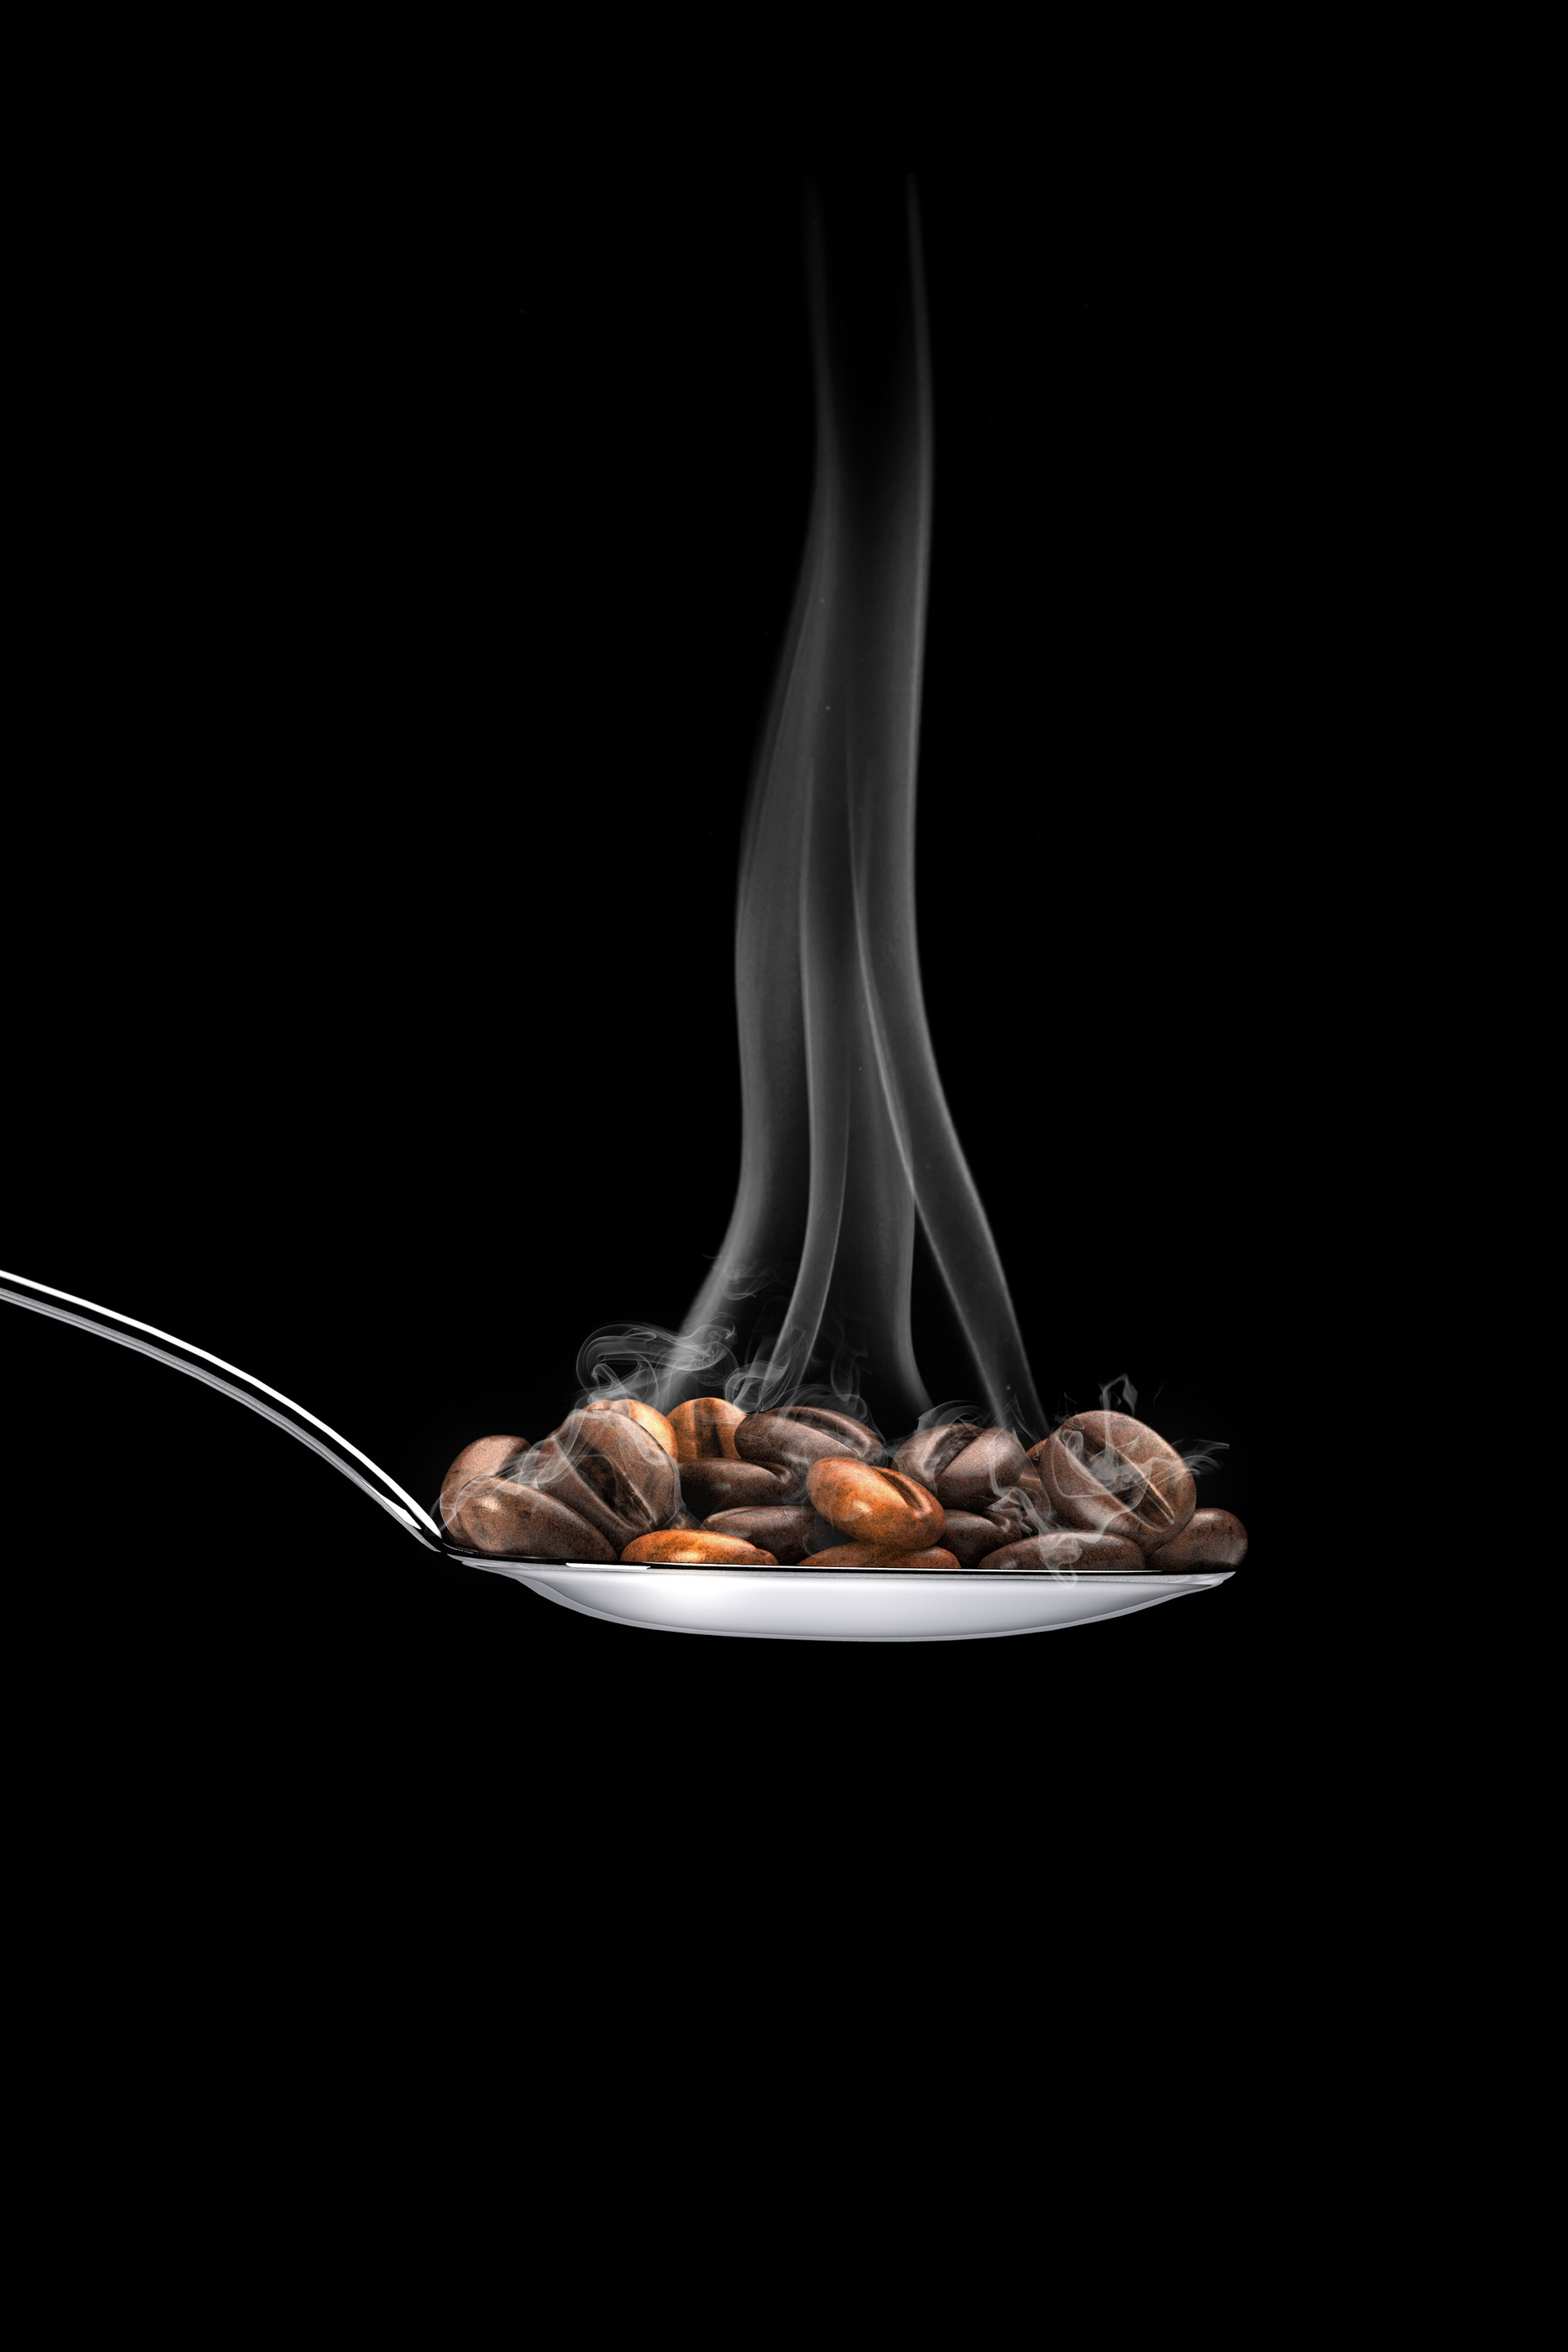 120133 Screensavers and Wallpapers Steam for phone. Download coffee, minimalism, steam, coffee beans, spoon pictures for free